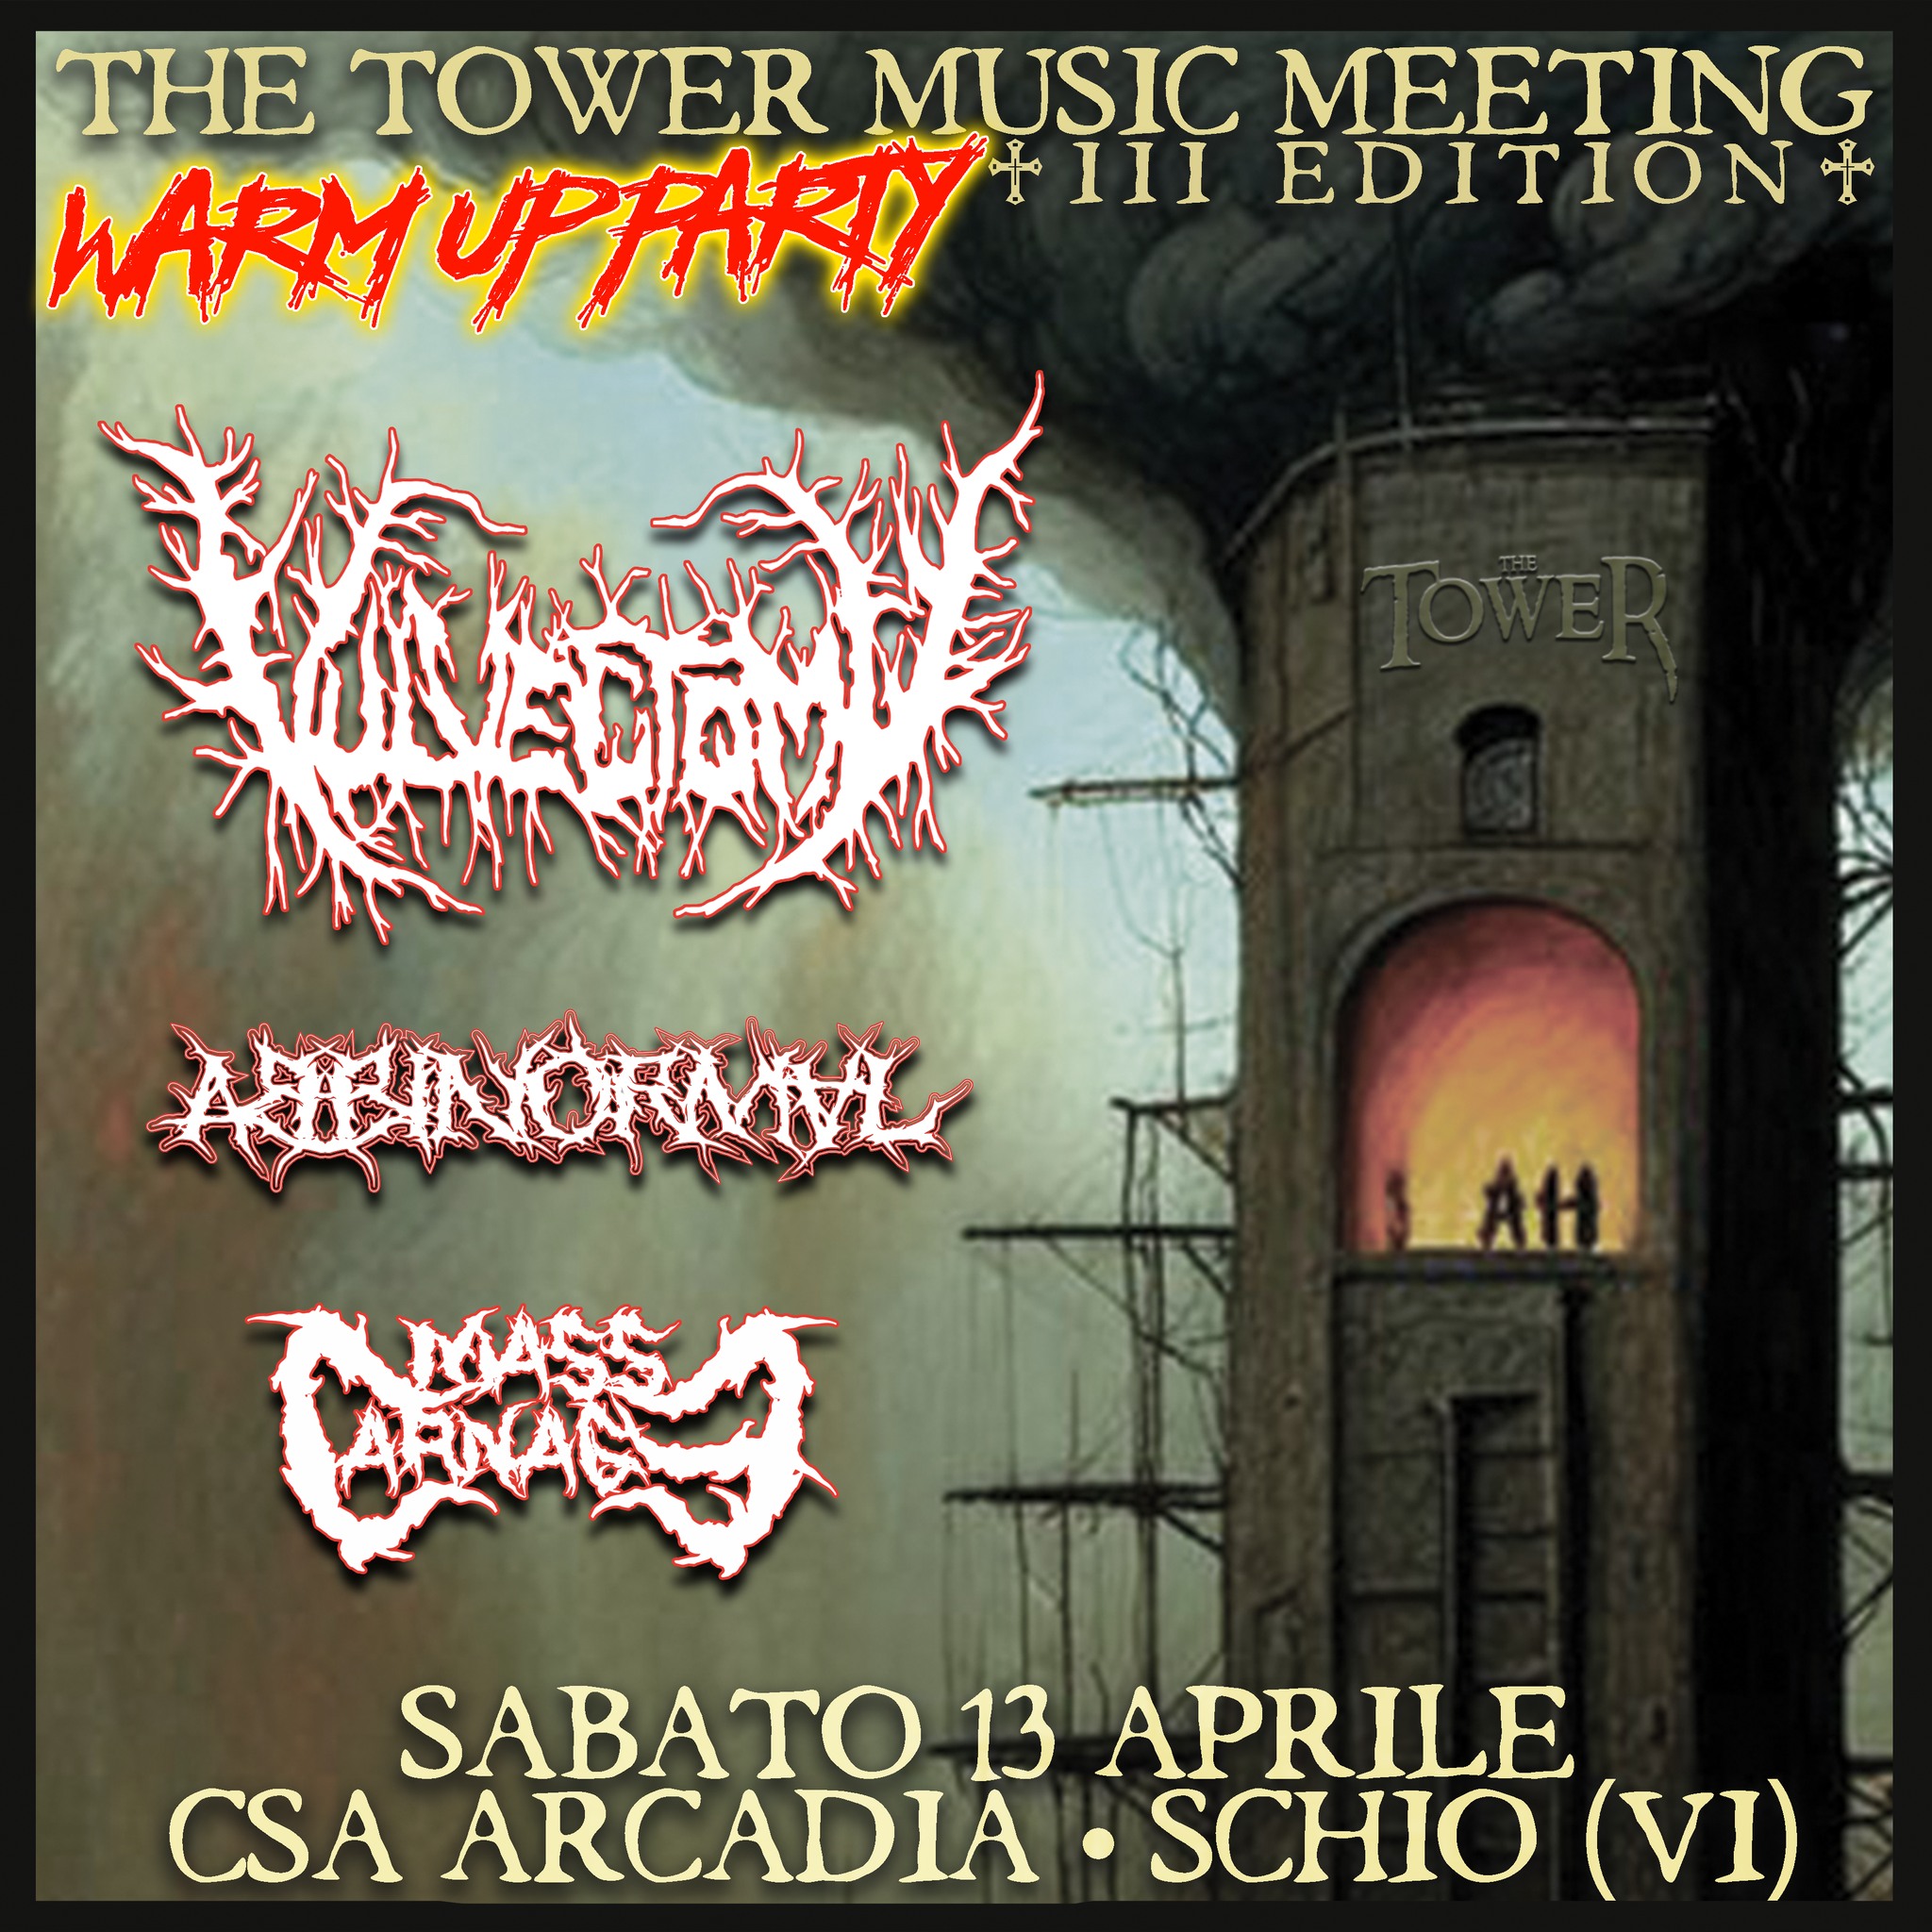 THE TOWER MUSIC MEETING: Warm Up Party con Vulvectomy, Abbinormal e Mass Carnage ​